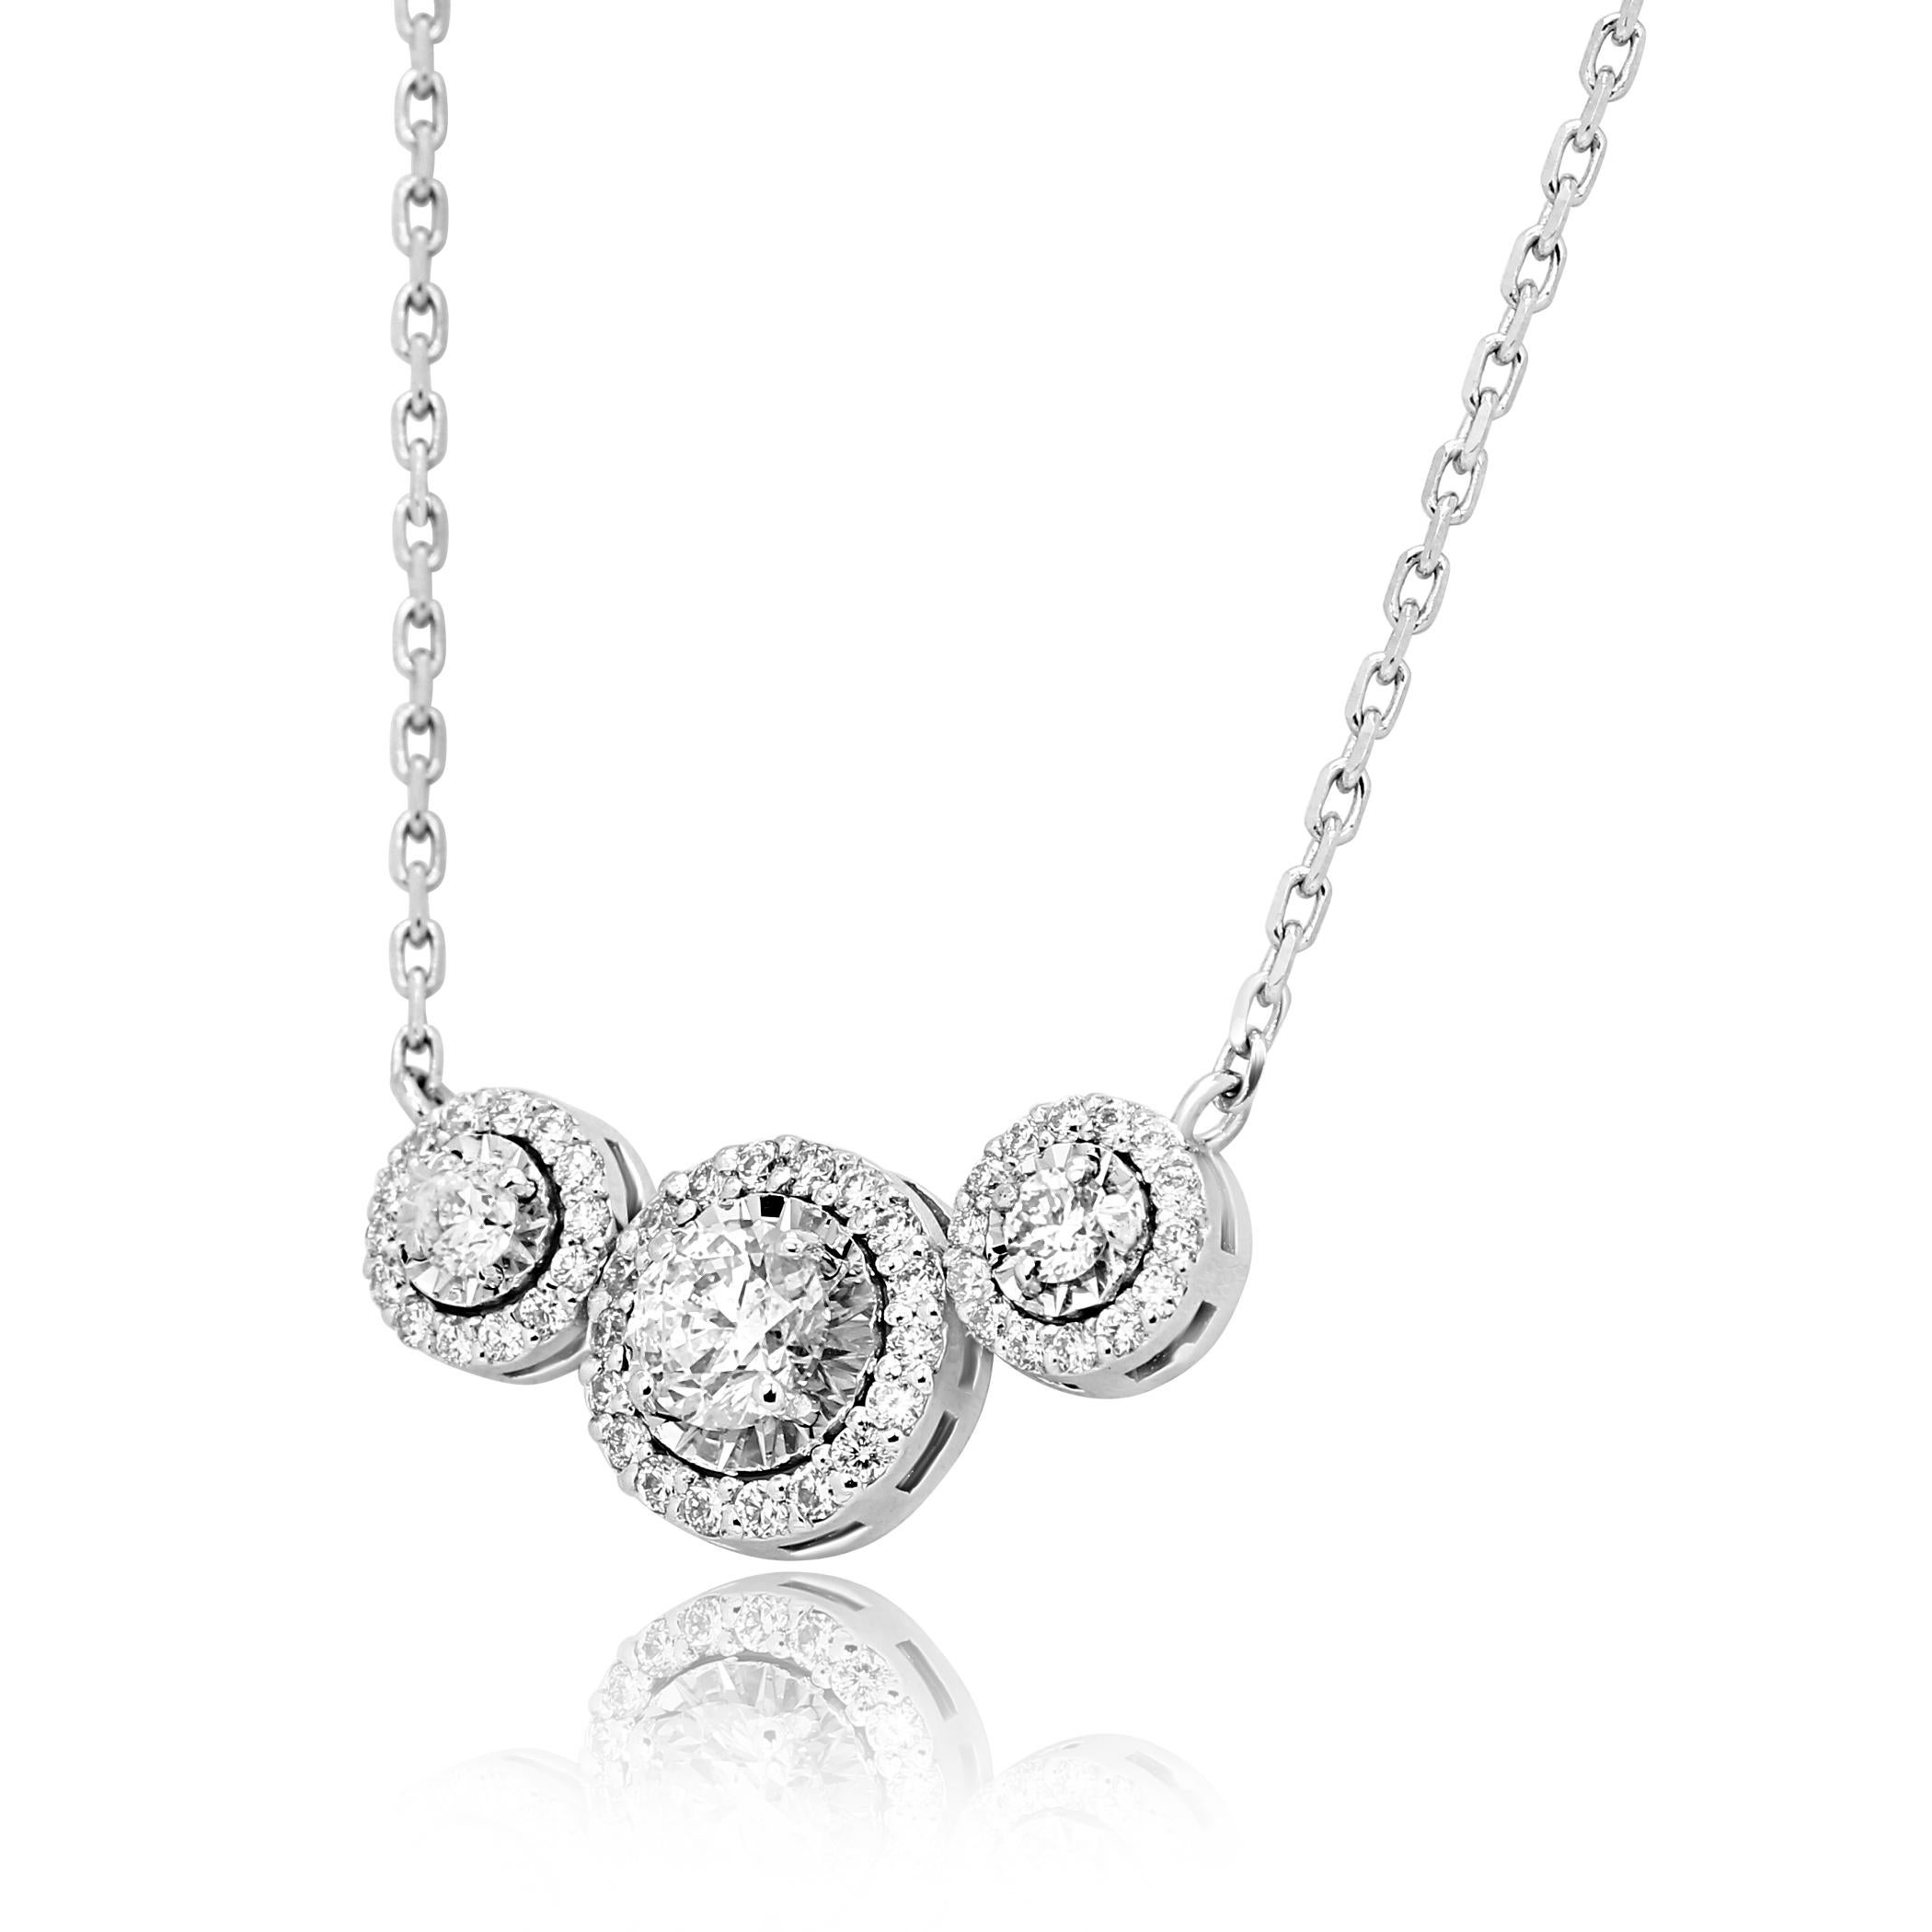 Stunning 3 White Diamond G-H Color SI-I Clarity  0.55 Carat Encircled in Single Halo of White Round Diamond G-H Color VS-SI Clarity 0.30 Carat. Set in Gorgeous big look Three Stone Penadant Chain Fashion Necklace. 
Total Diamond Weight 0.85